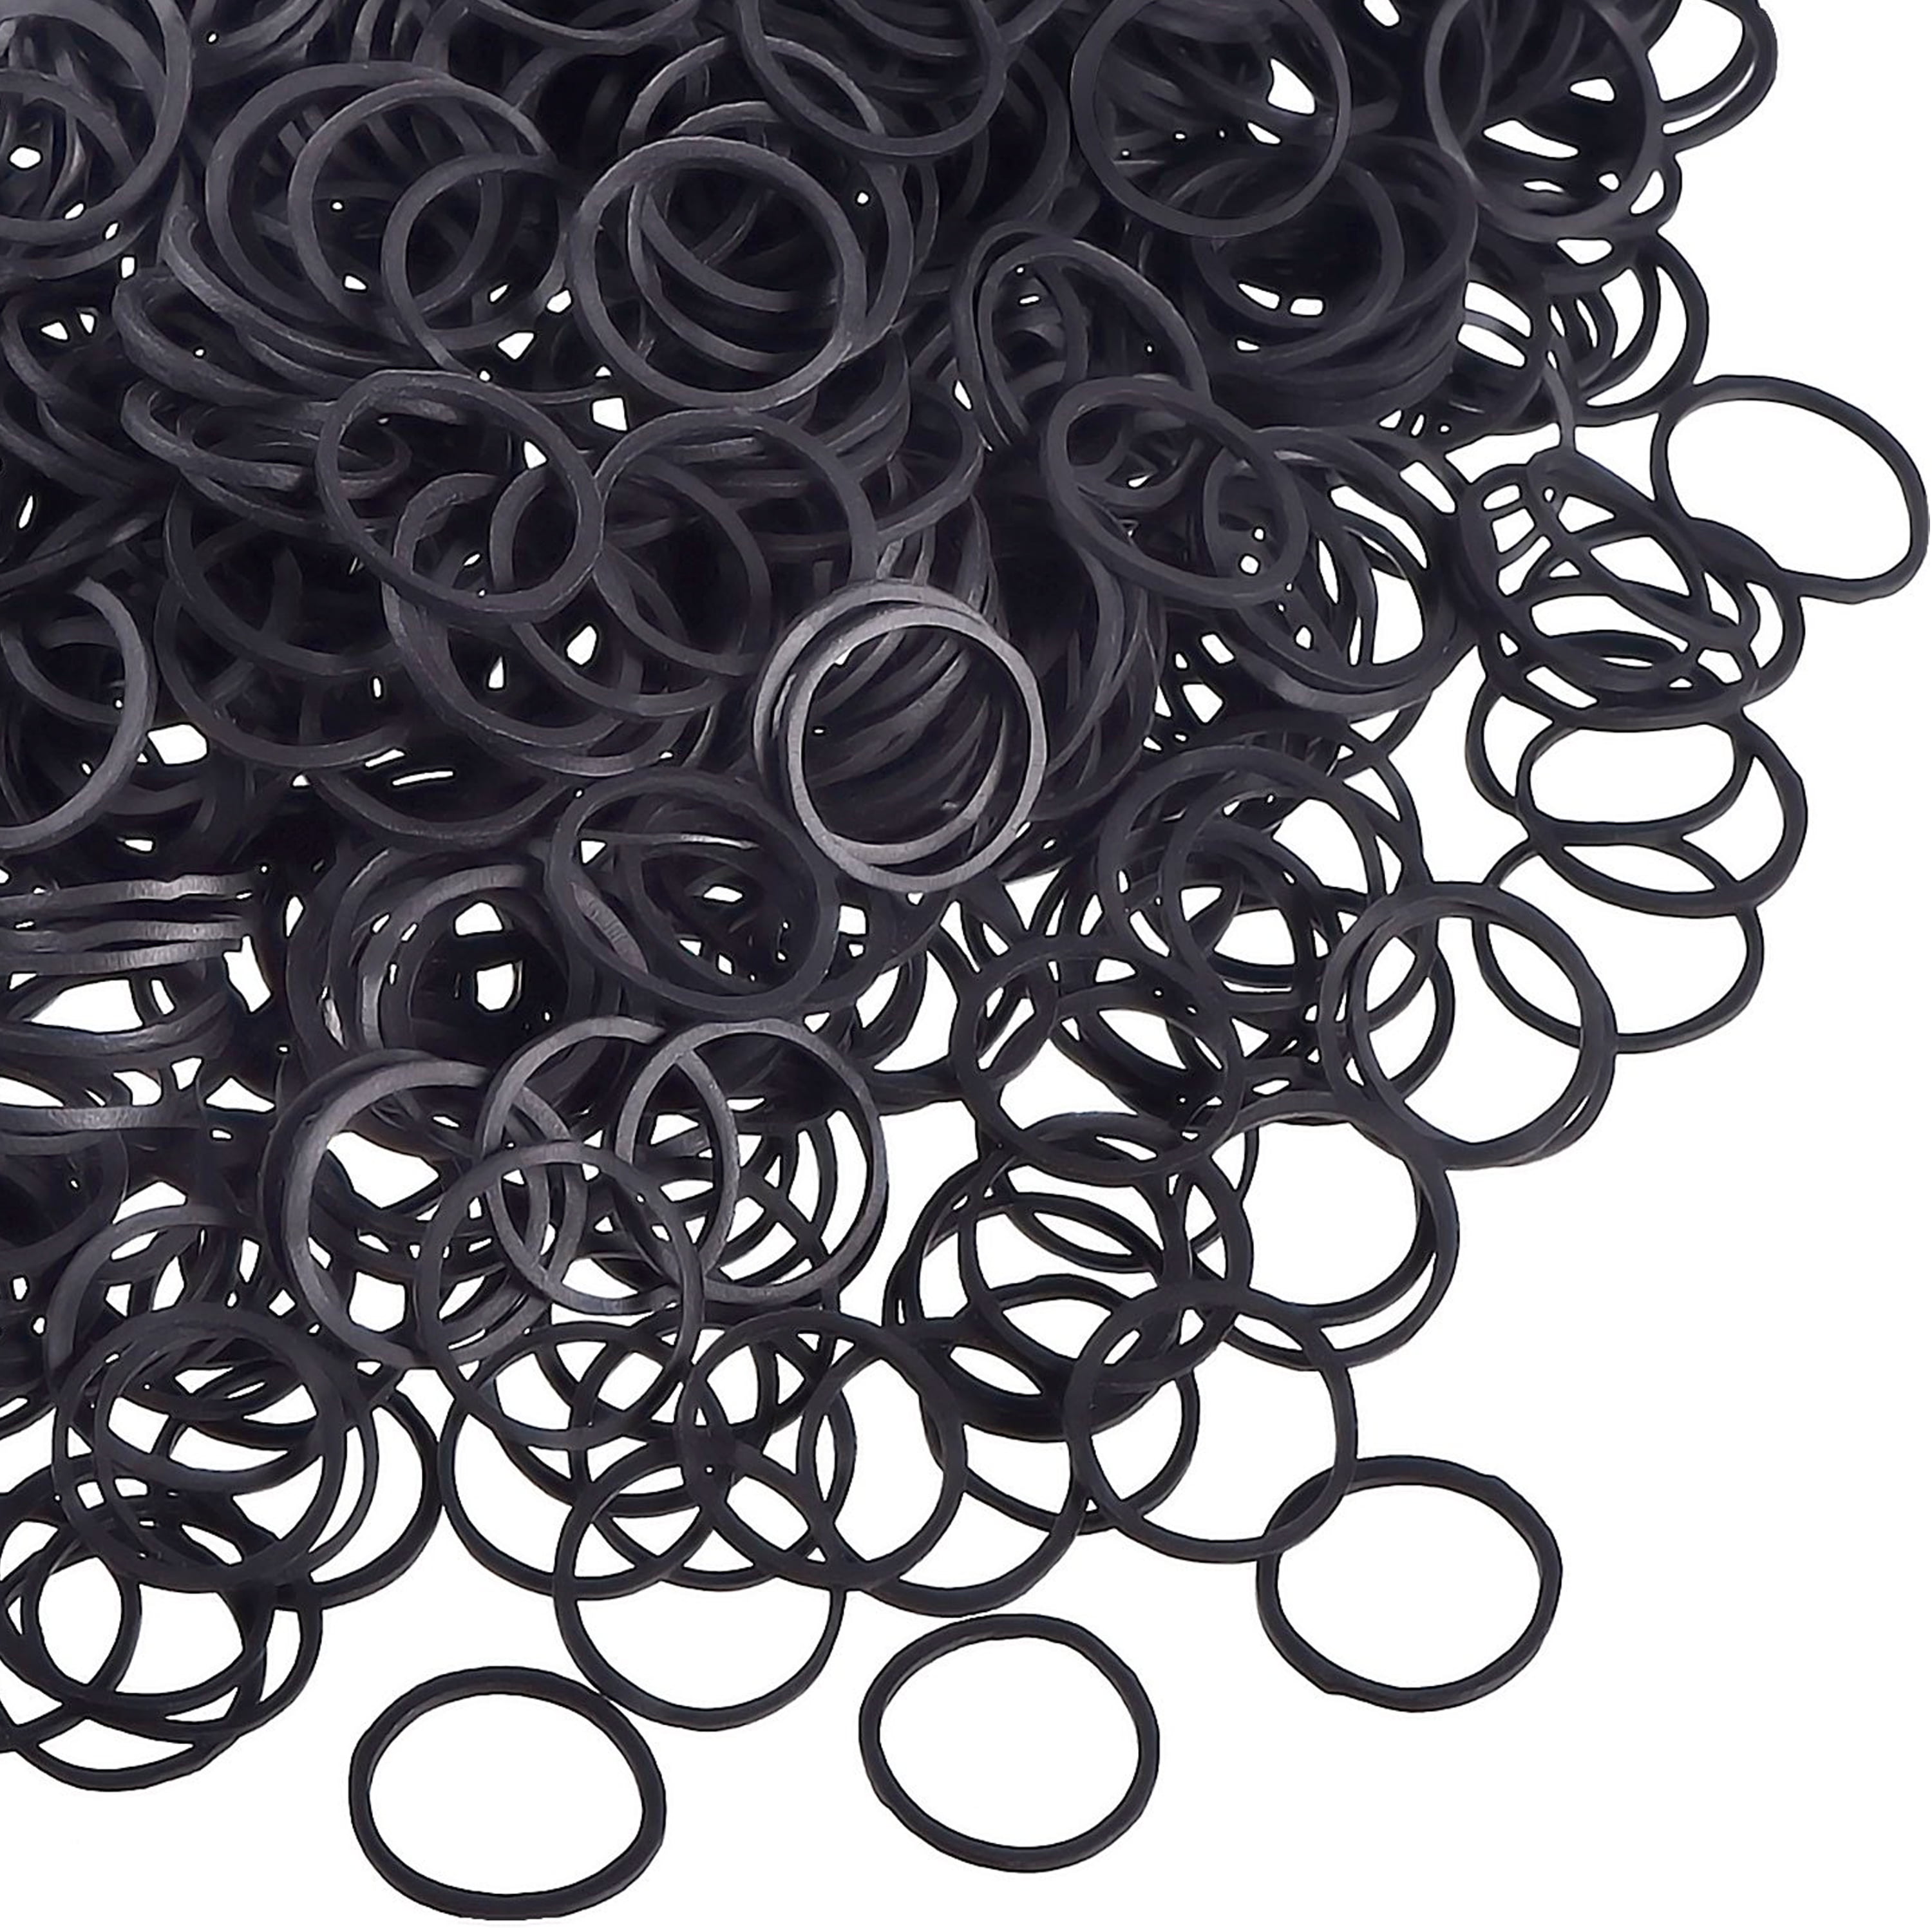 Professional Nail & Beauty Supplies - Rubber Bands Clear/ Black (500 Pcs)